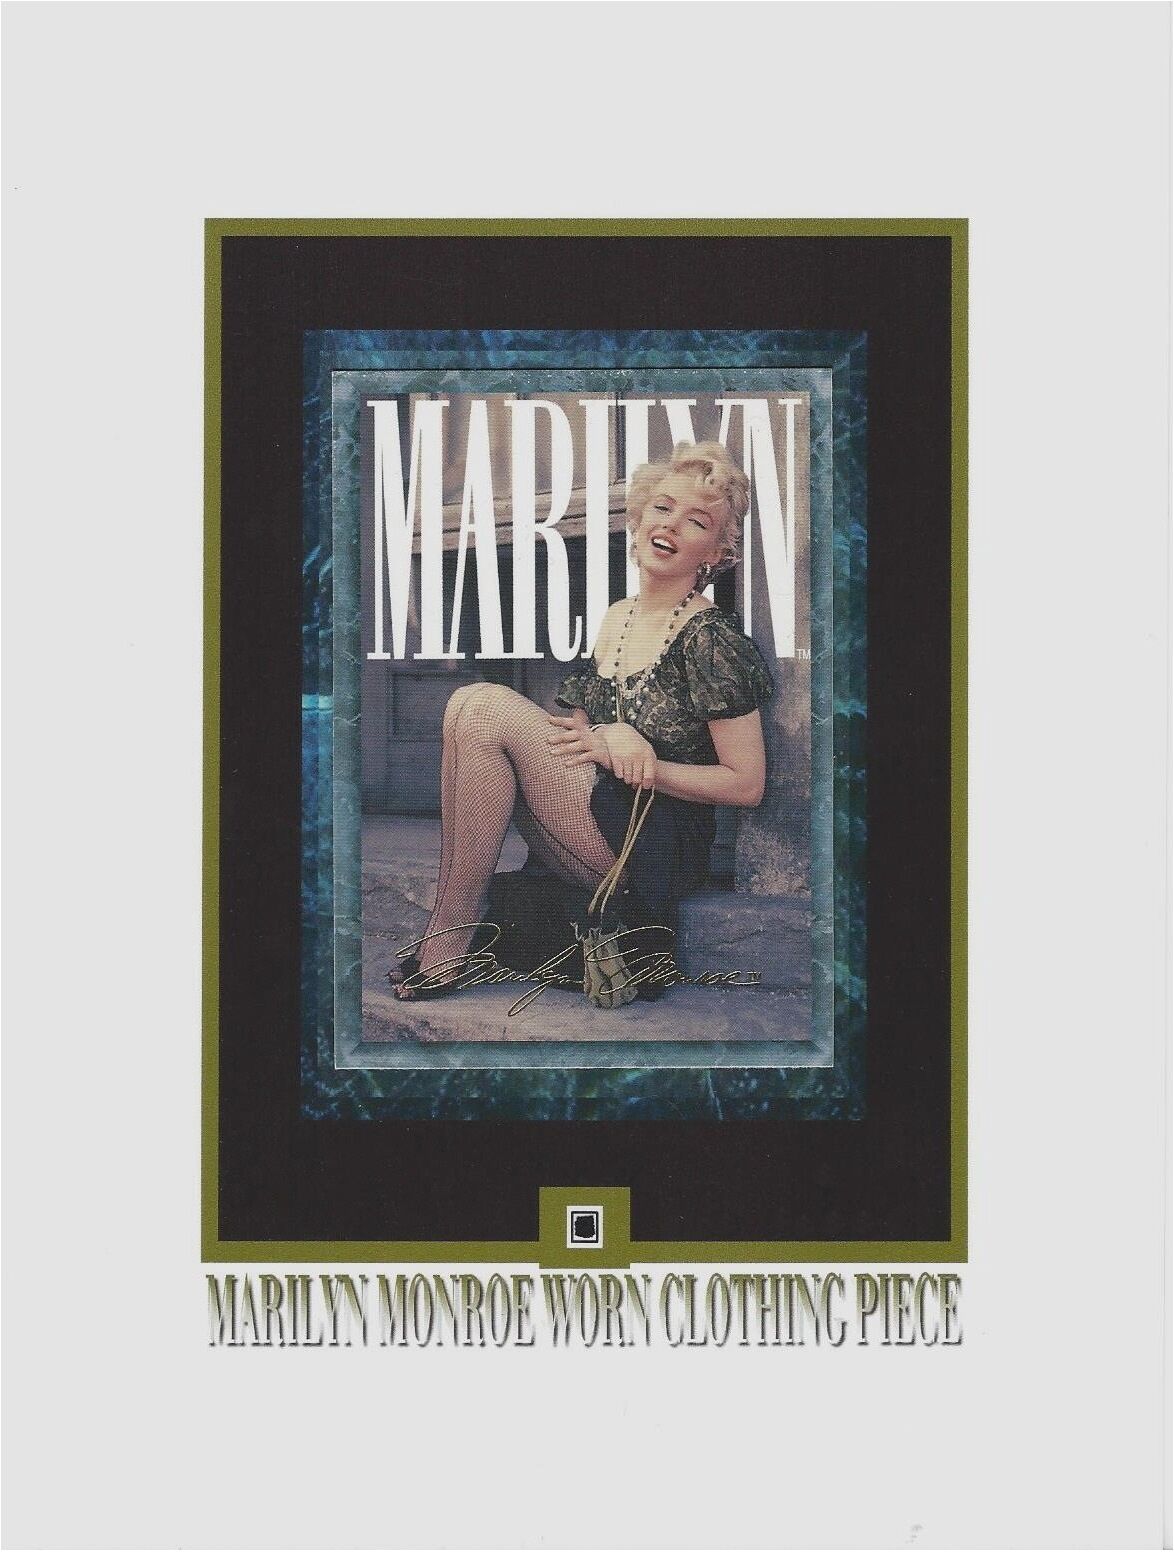 MARILYN MONROE personal used worn CLOTHING PIECE relic, swatch, portion, owned